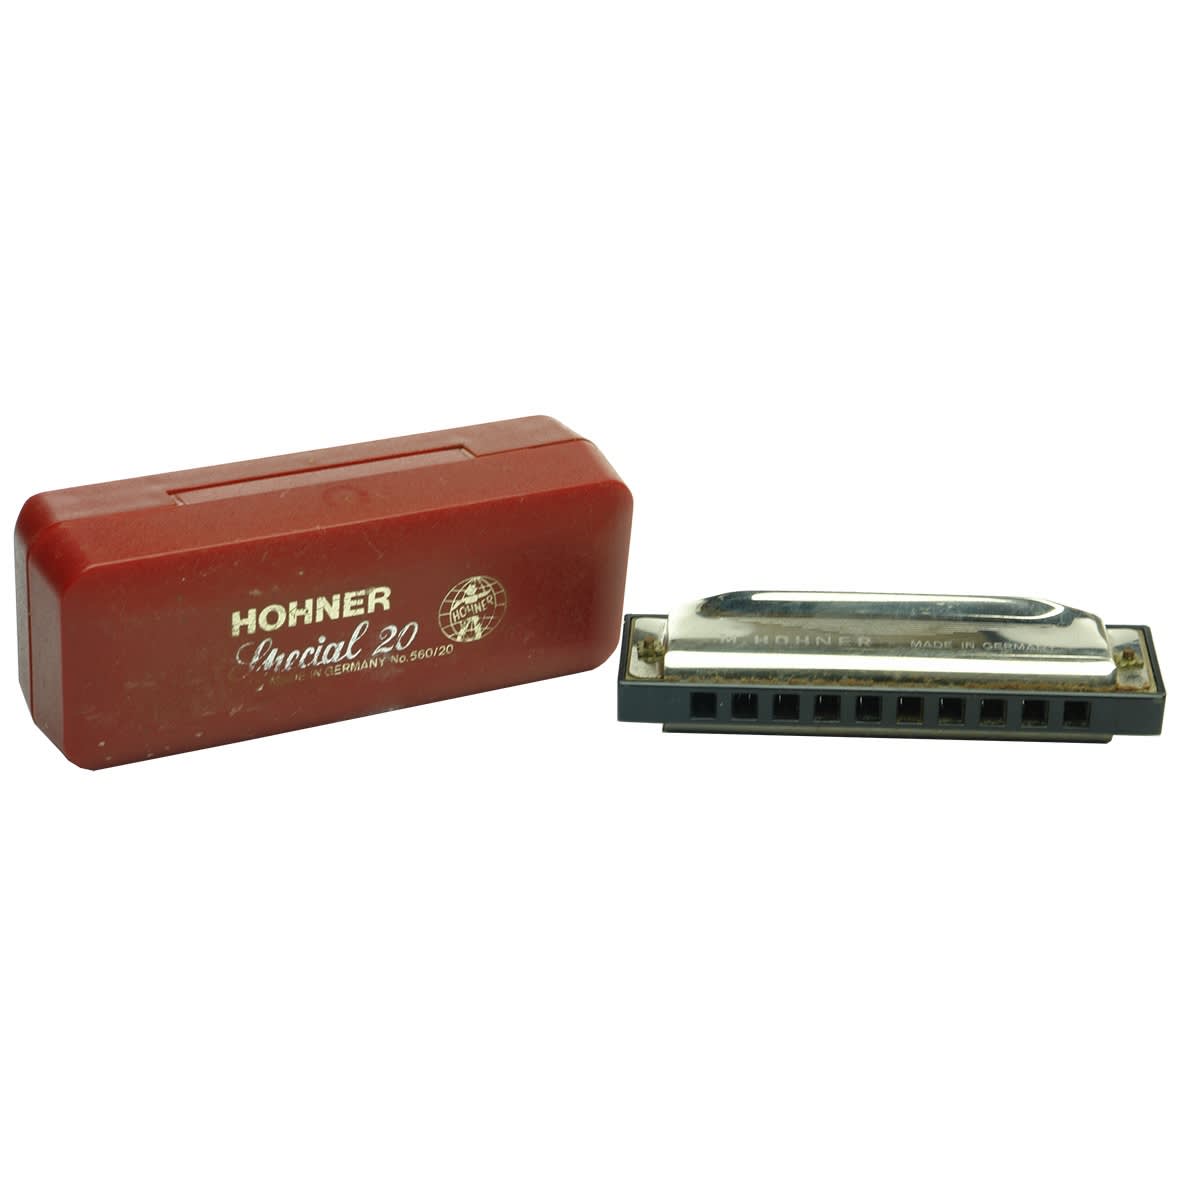 Music. Hohner Special 20 Harmonica. Made in Germany.